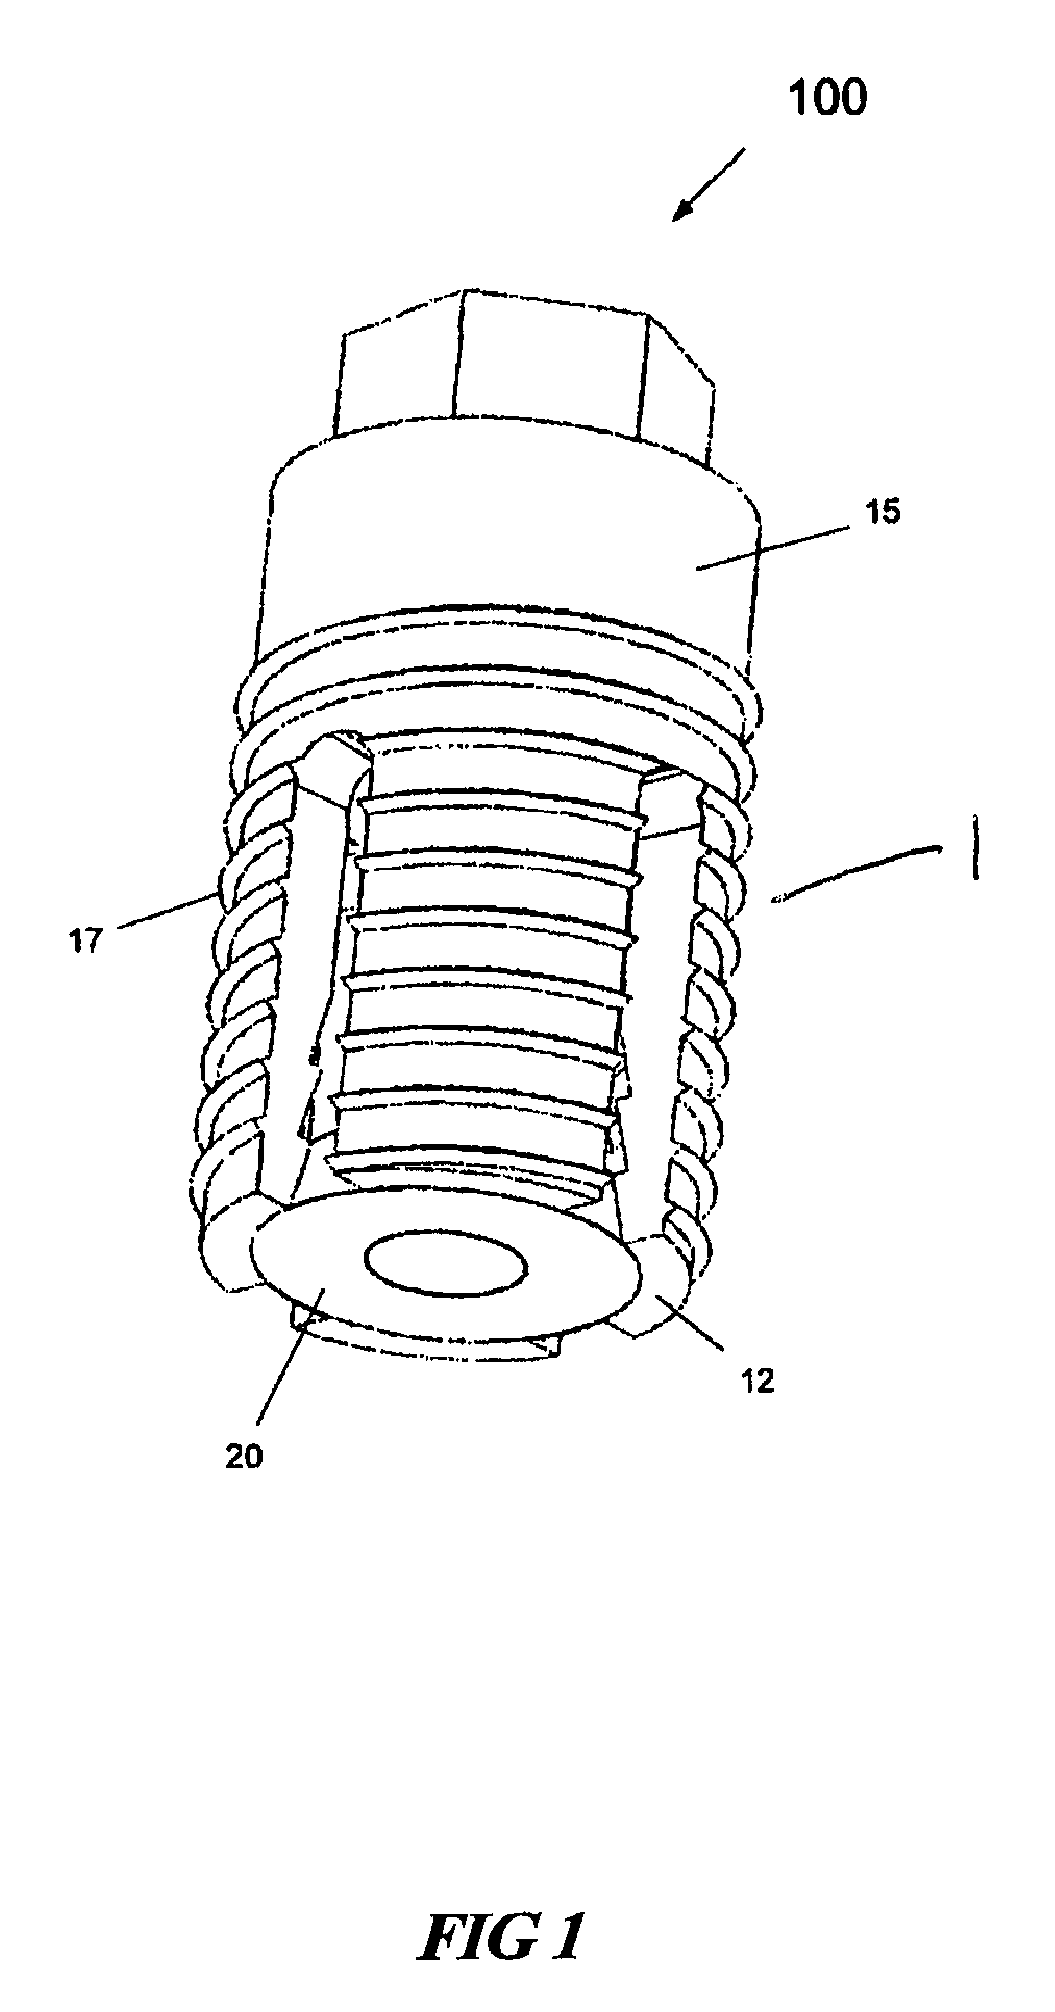 Expandable dental implants of high surface area and methods of expanding the same